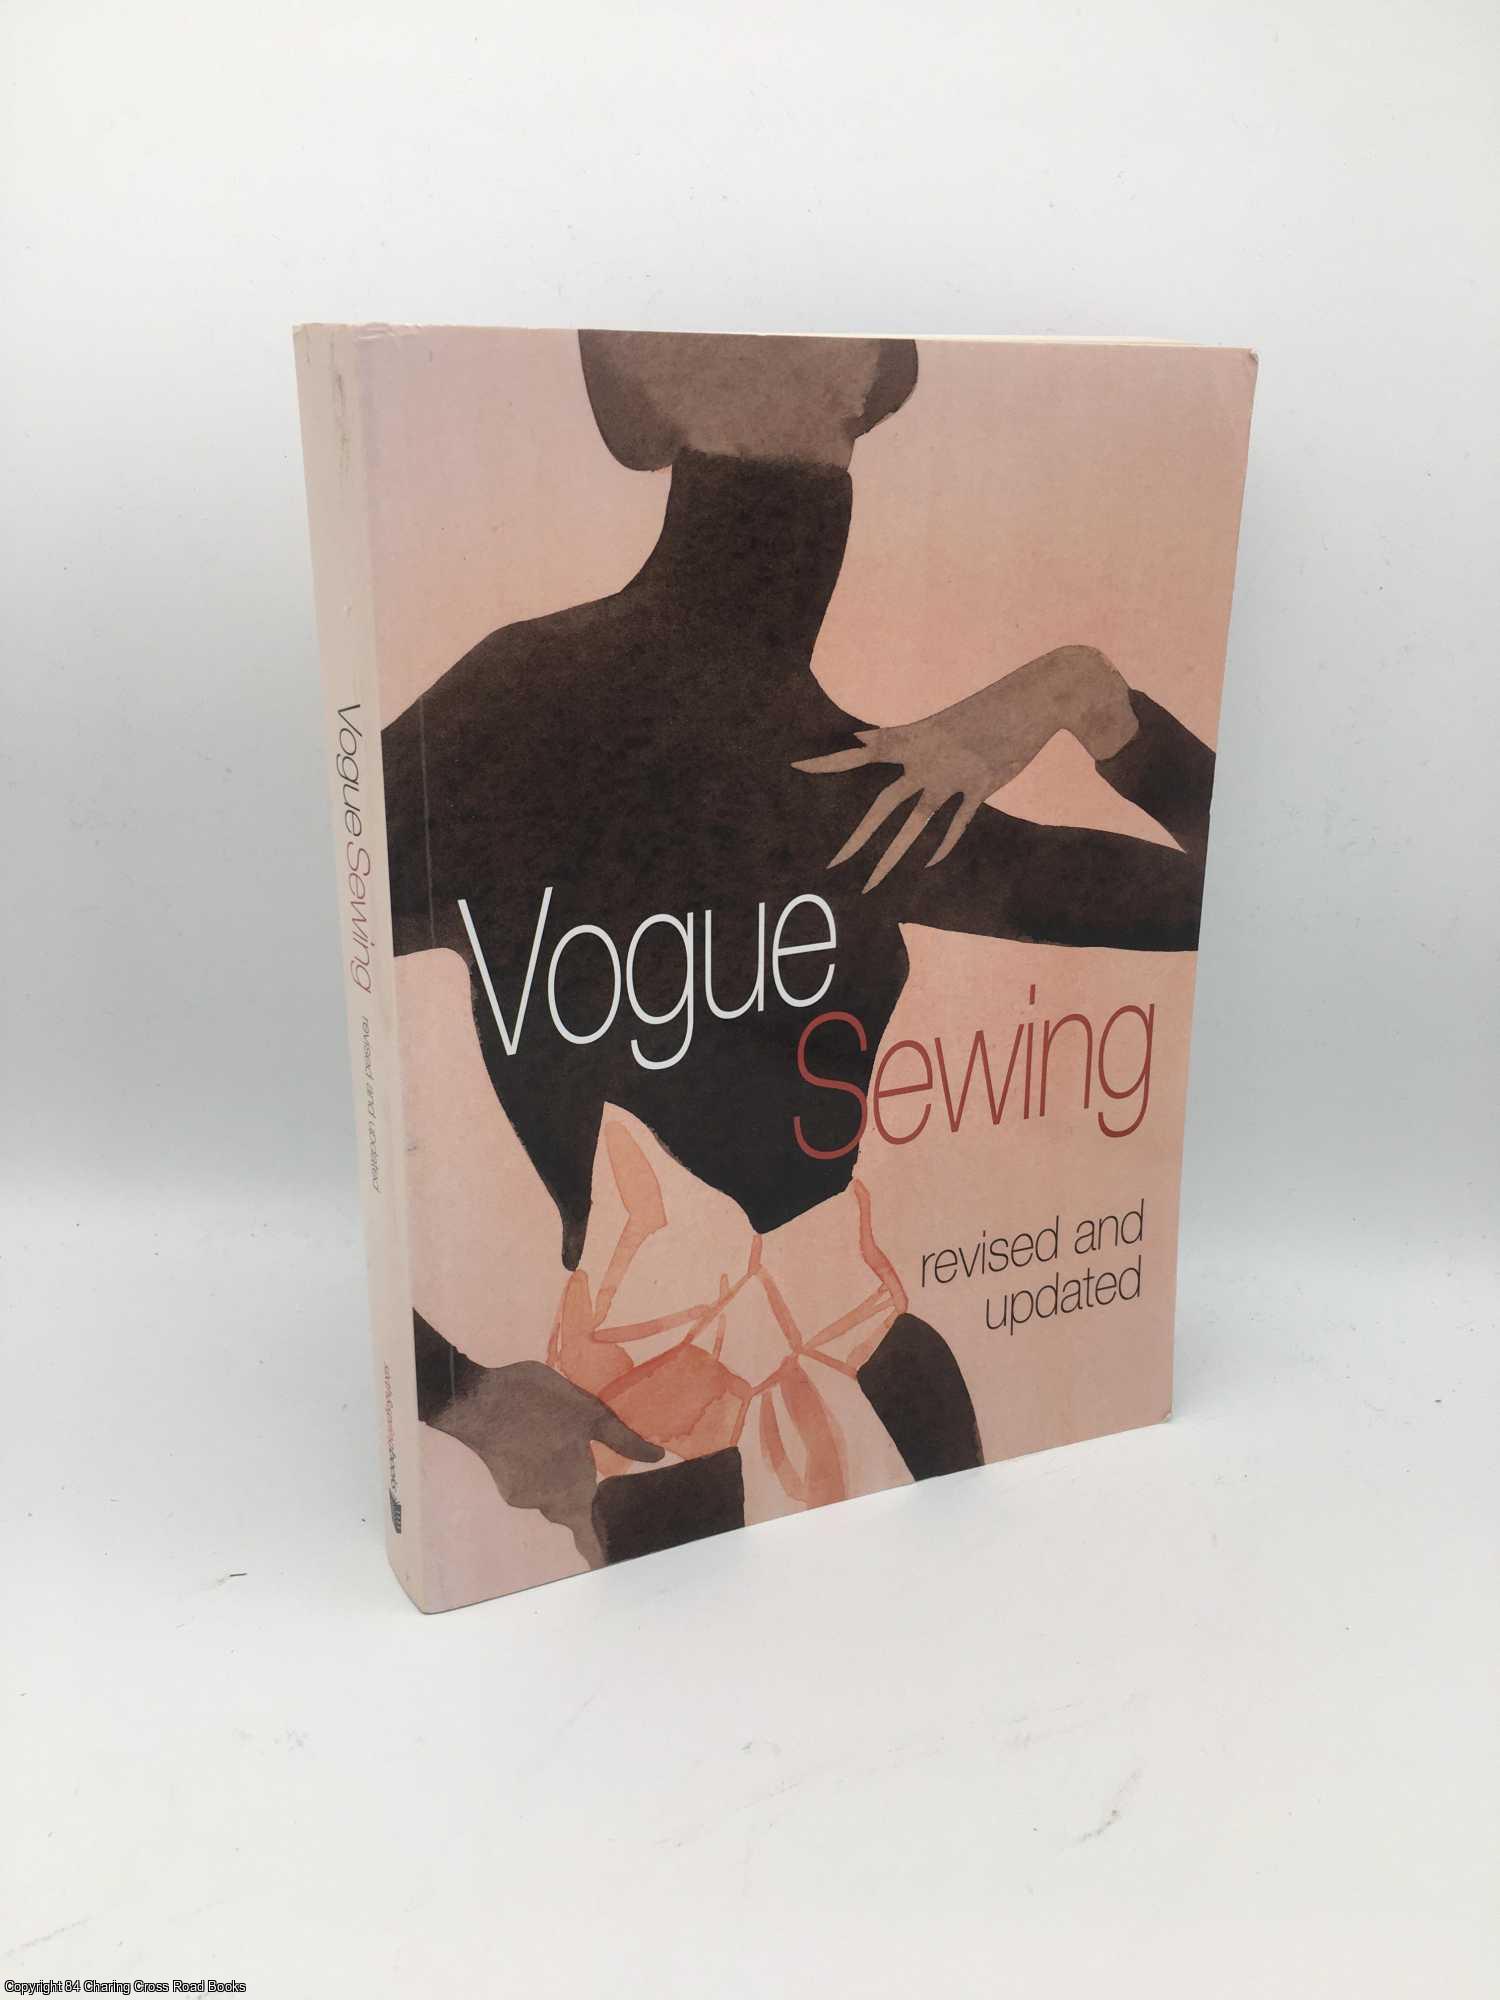 McDonald, Crystal - Vogue Sewing, Revised and Updated